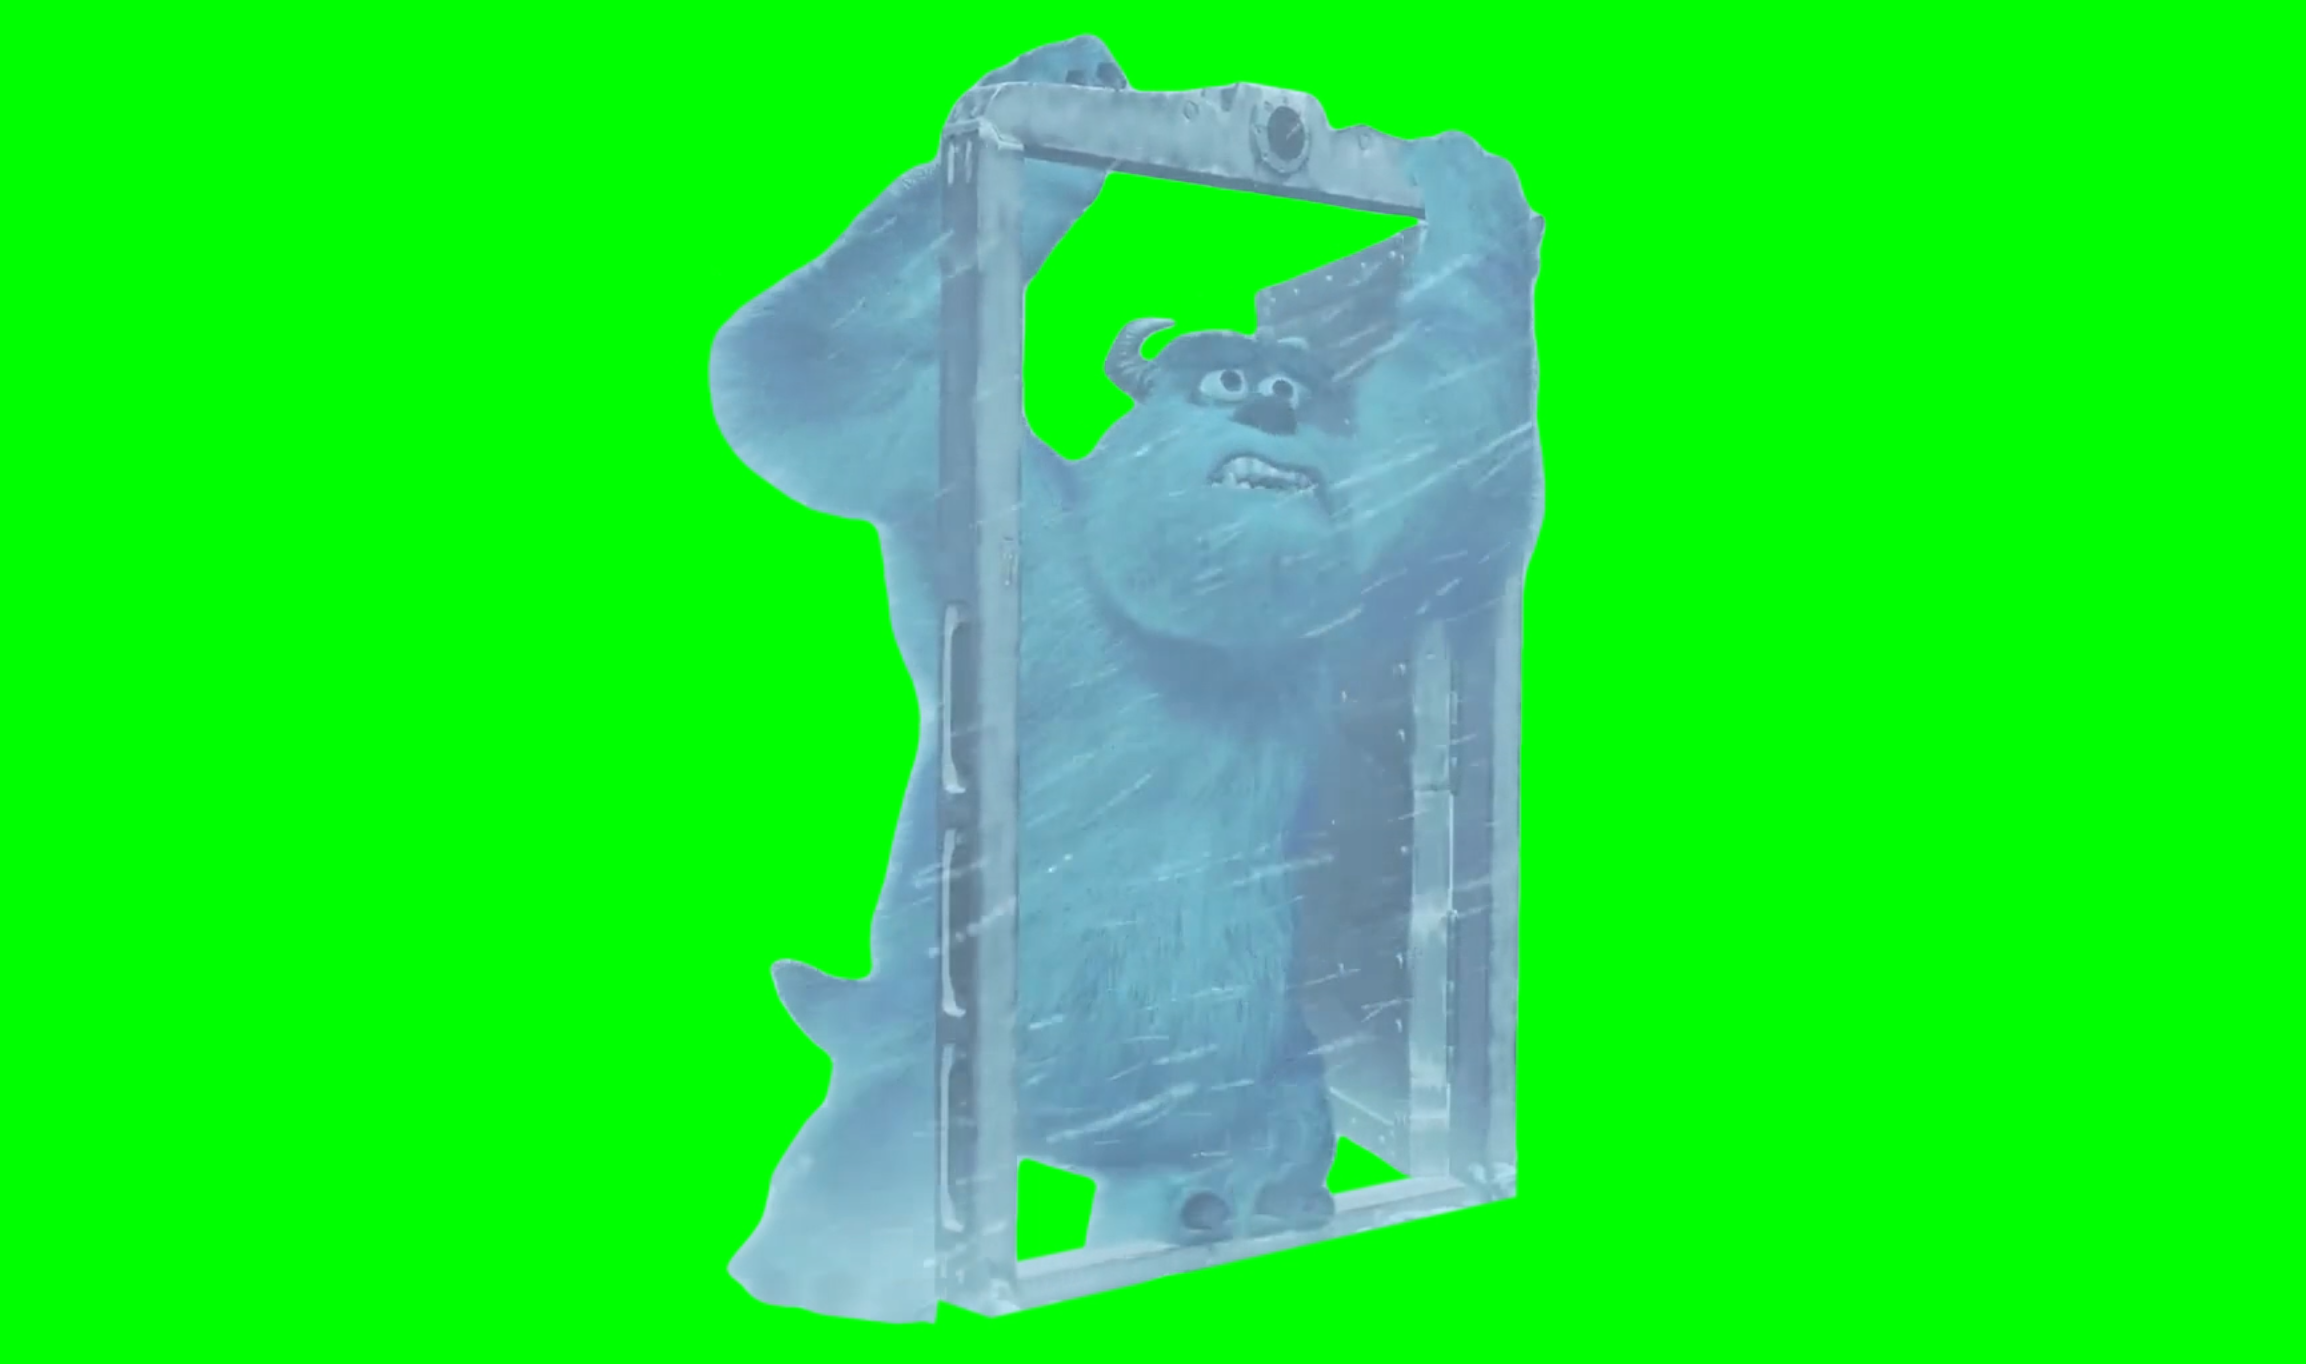 Monsters Inc. - Sulley trying to open empty door during Snowstorm (Green Screen)